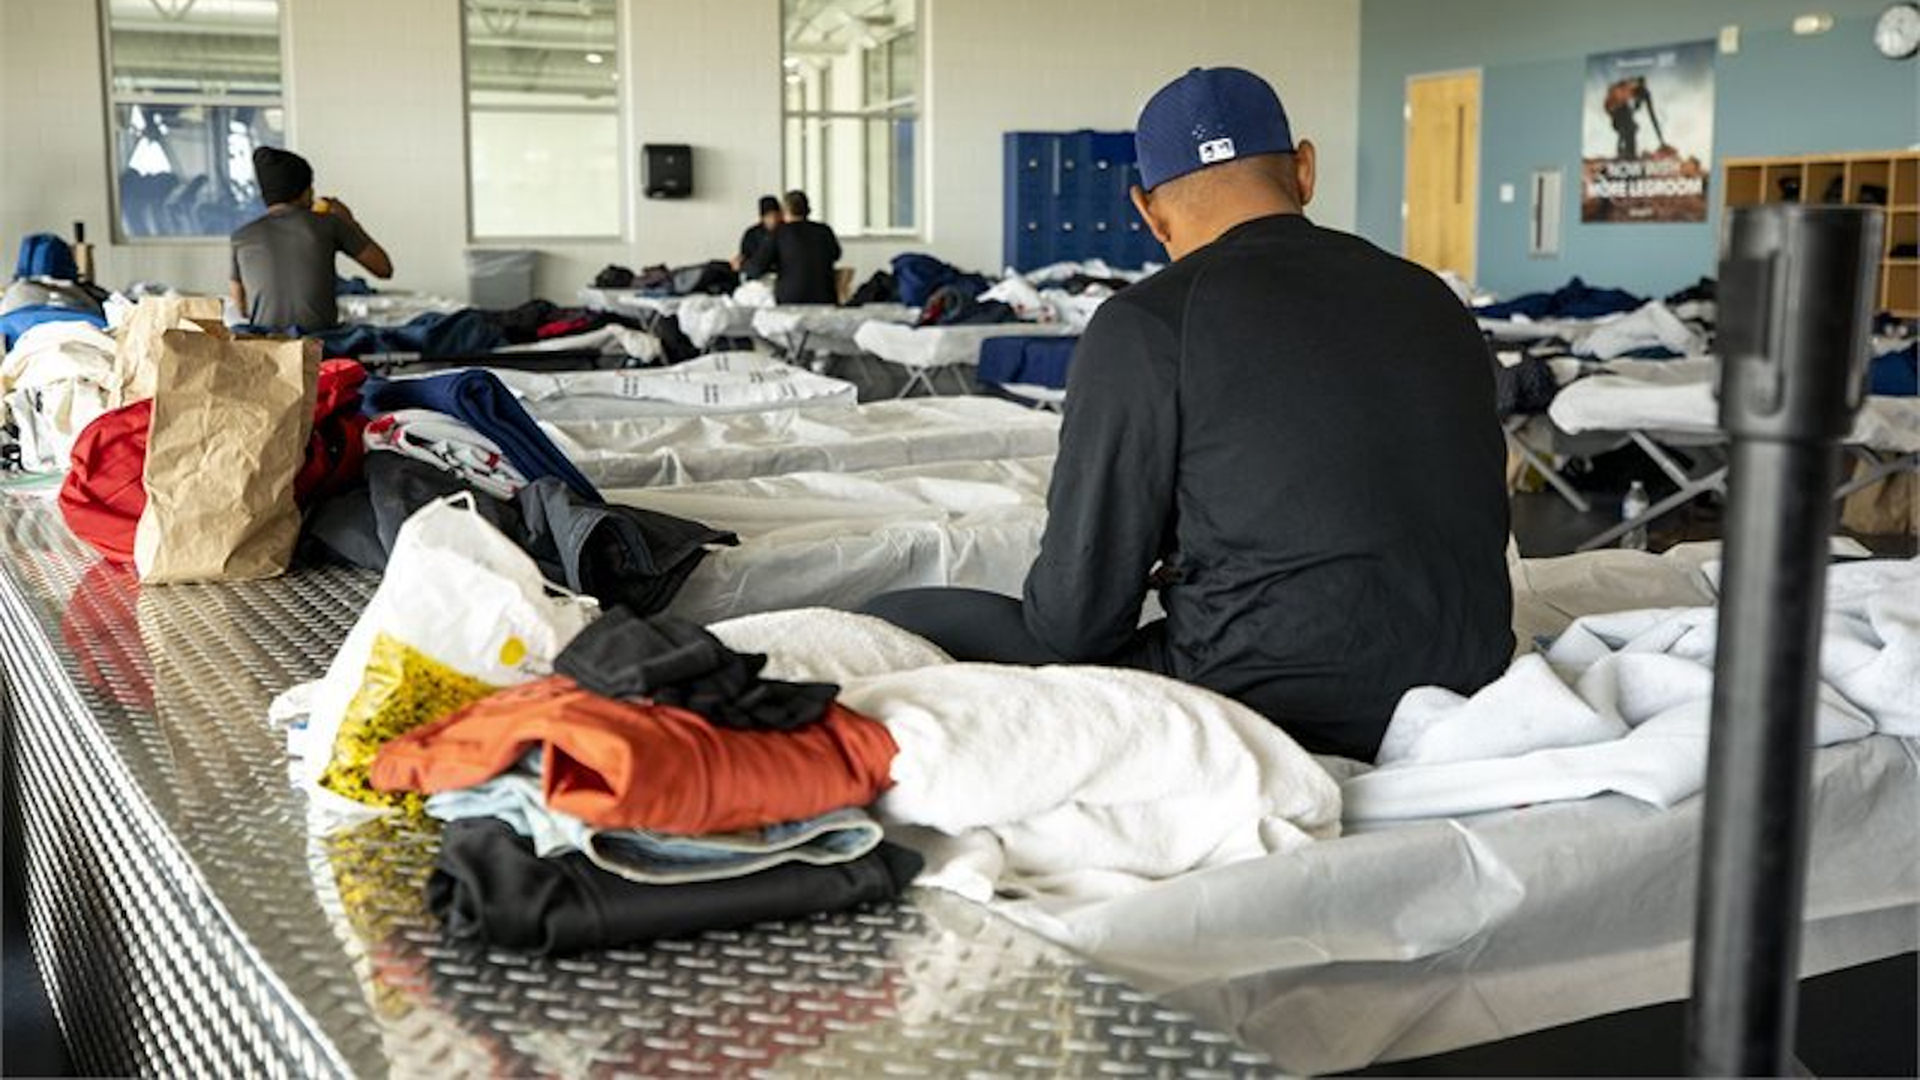 Migrants from the southern border are being housed in Denver shelters.